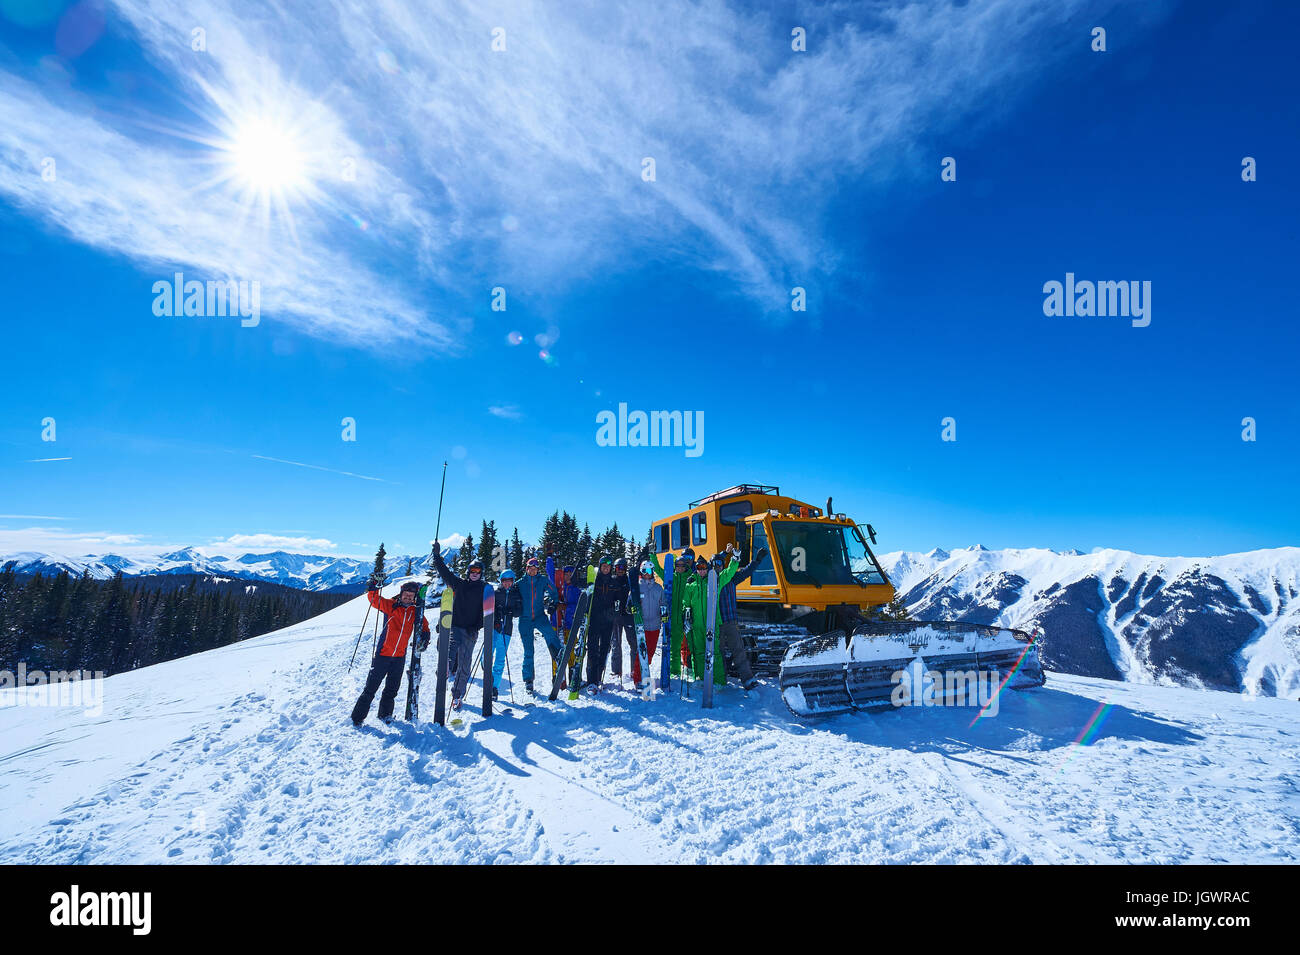 Group portrait of male and female skiers on ski slope by snow coach, Aspen, Colorado, USA Stock Photo